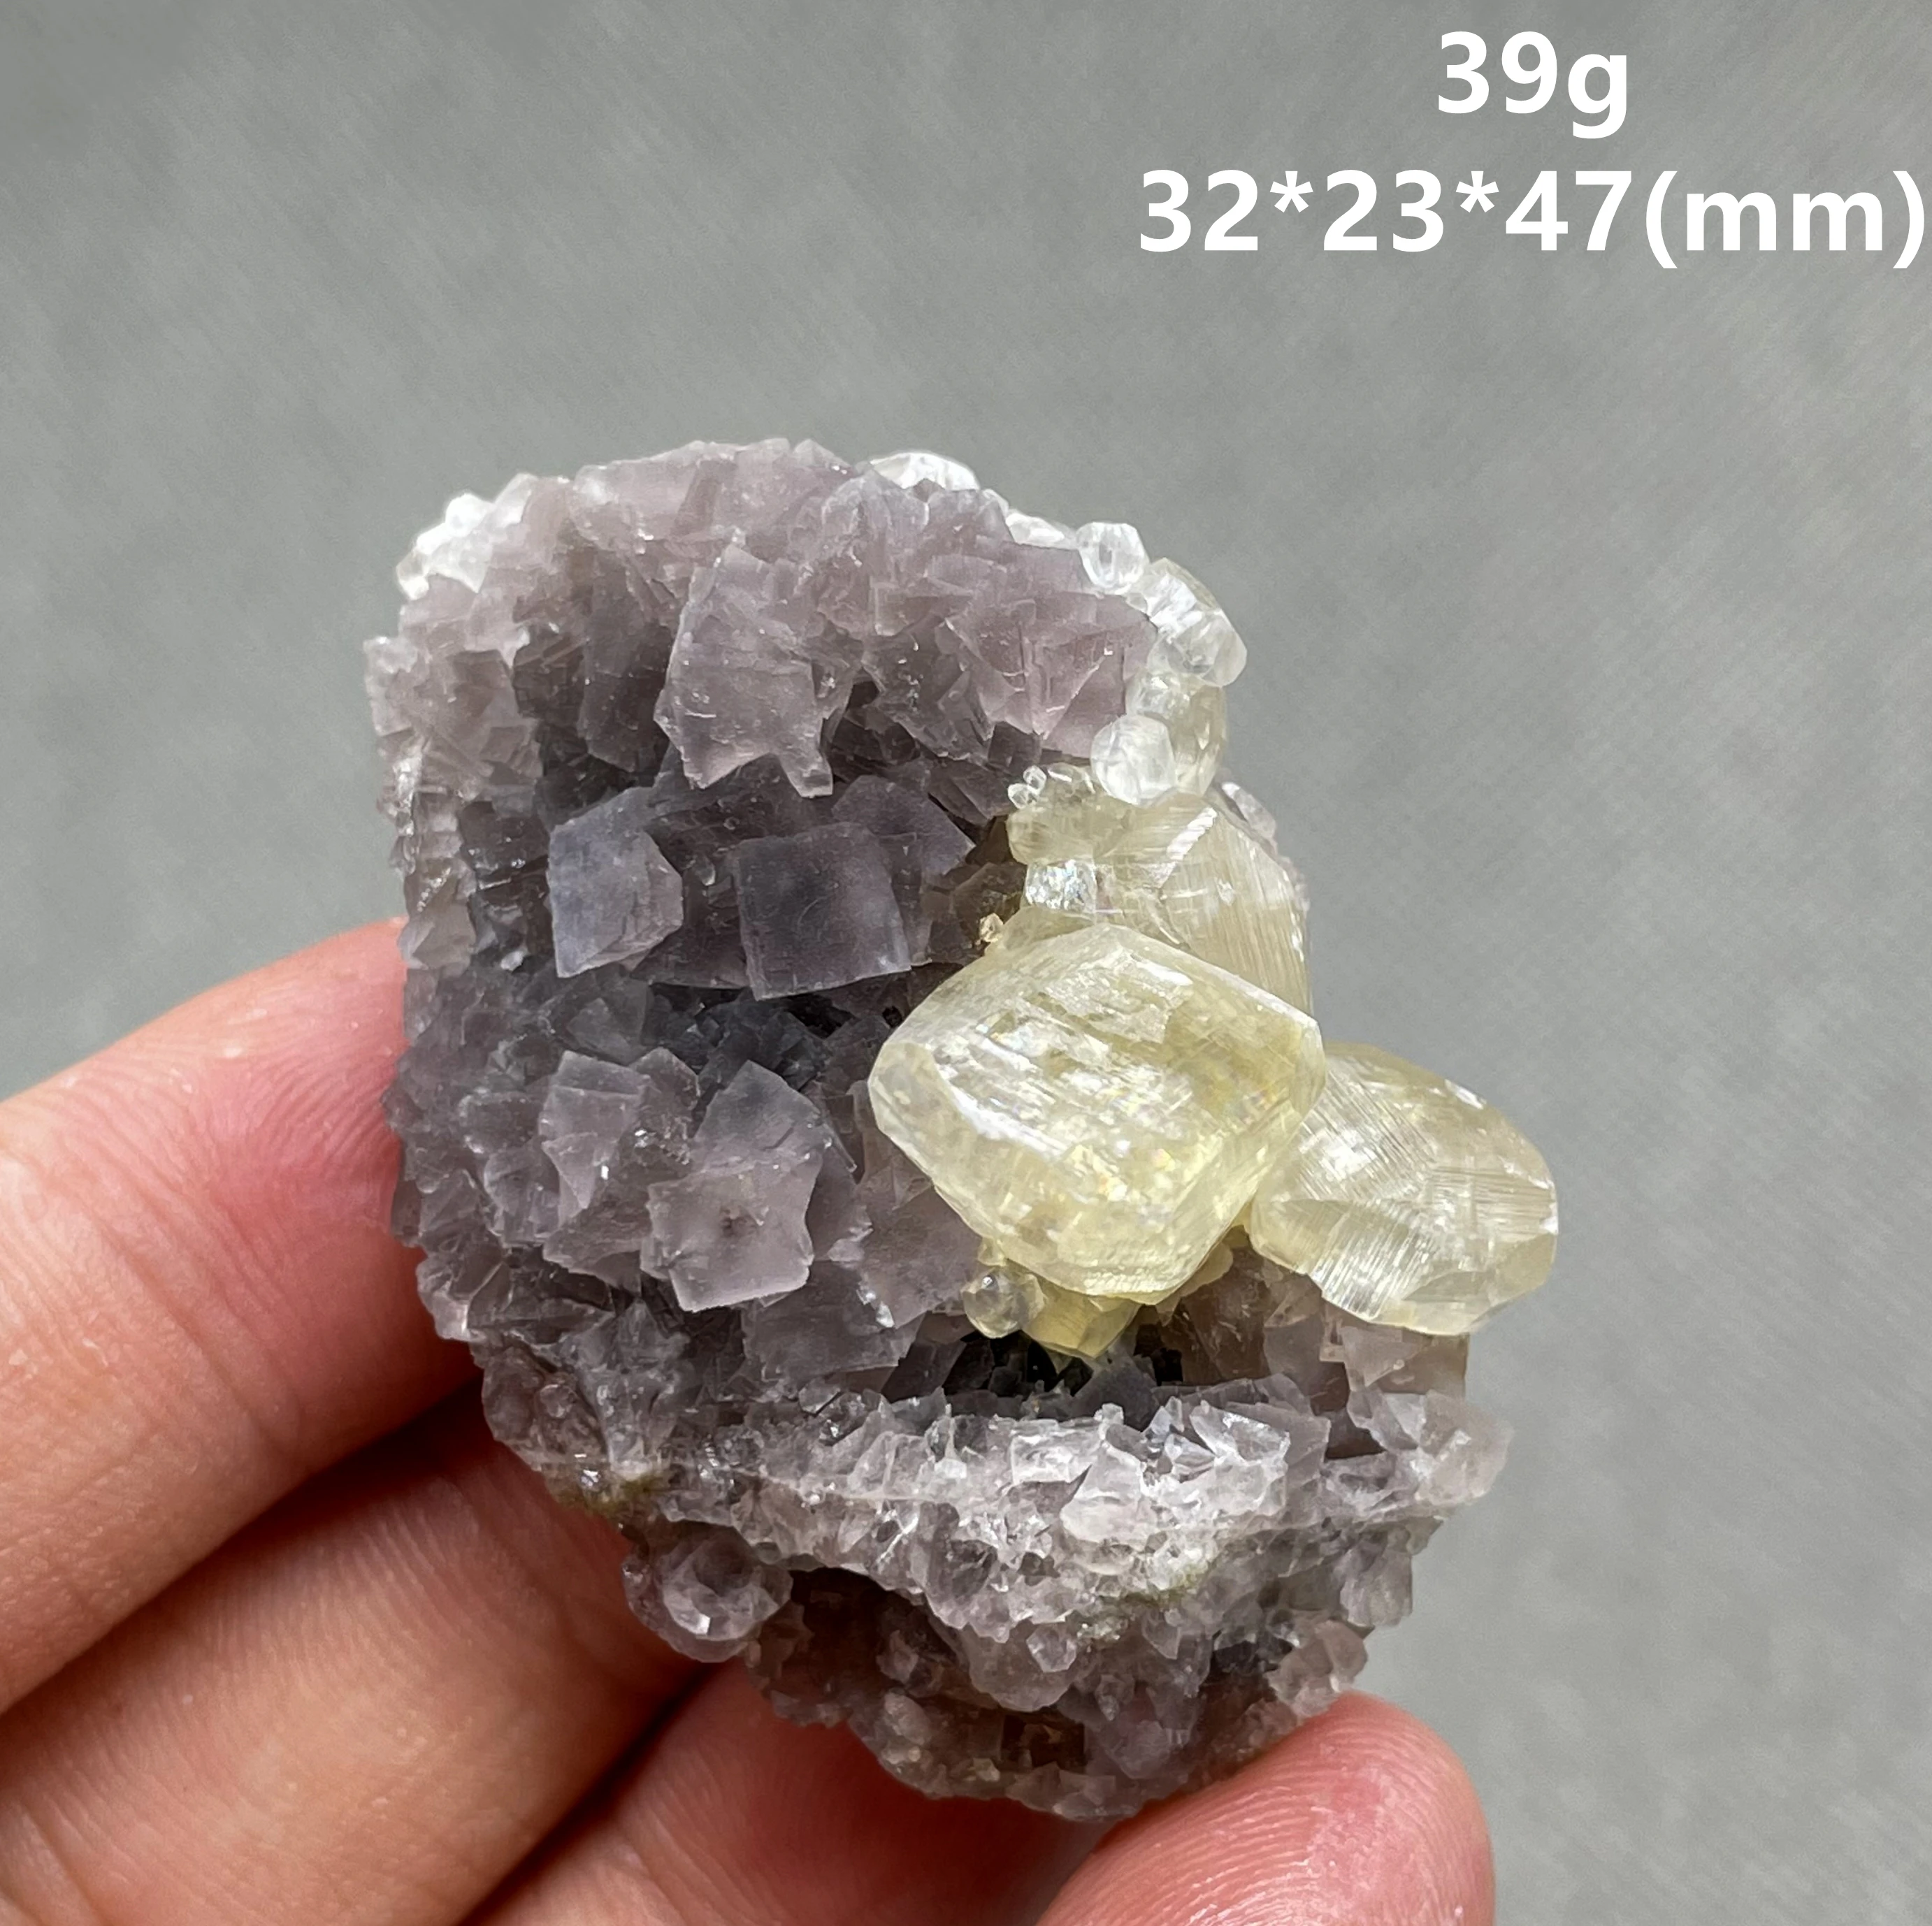 

NEW! 100% natural Purple Fluorite and fluorescent calcite symbiotic mineral specimen stones and crystals healing crystals